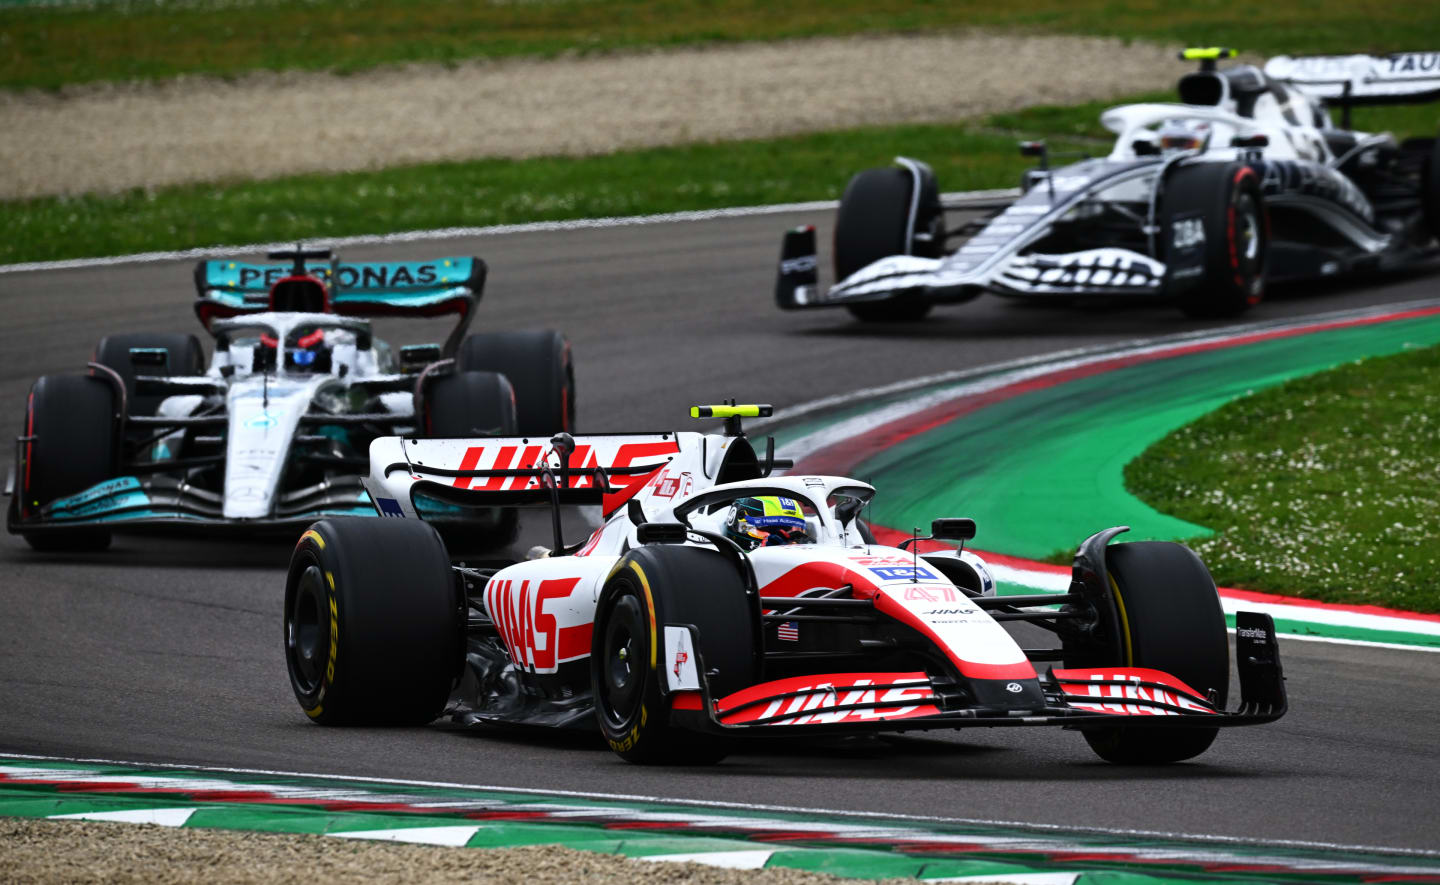 IMOLA, ITALY - APRIL 23: Mick Schumacher of Germany driving the (47) Haas F1 VF-22 Ferrari leads